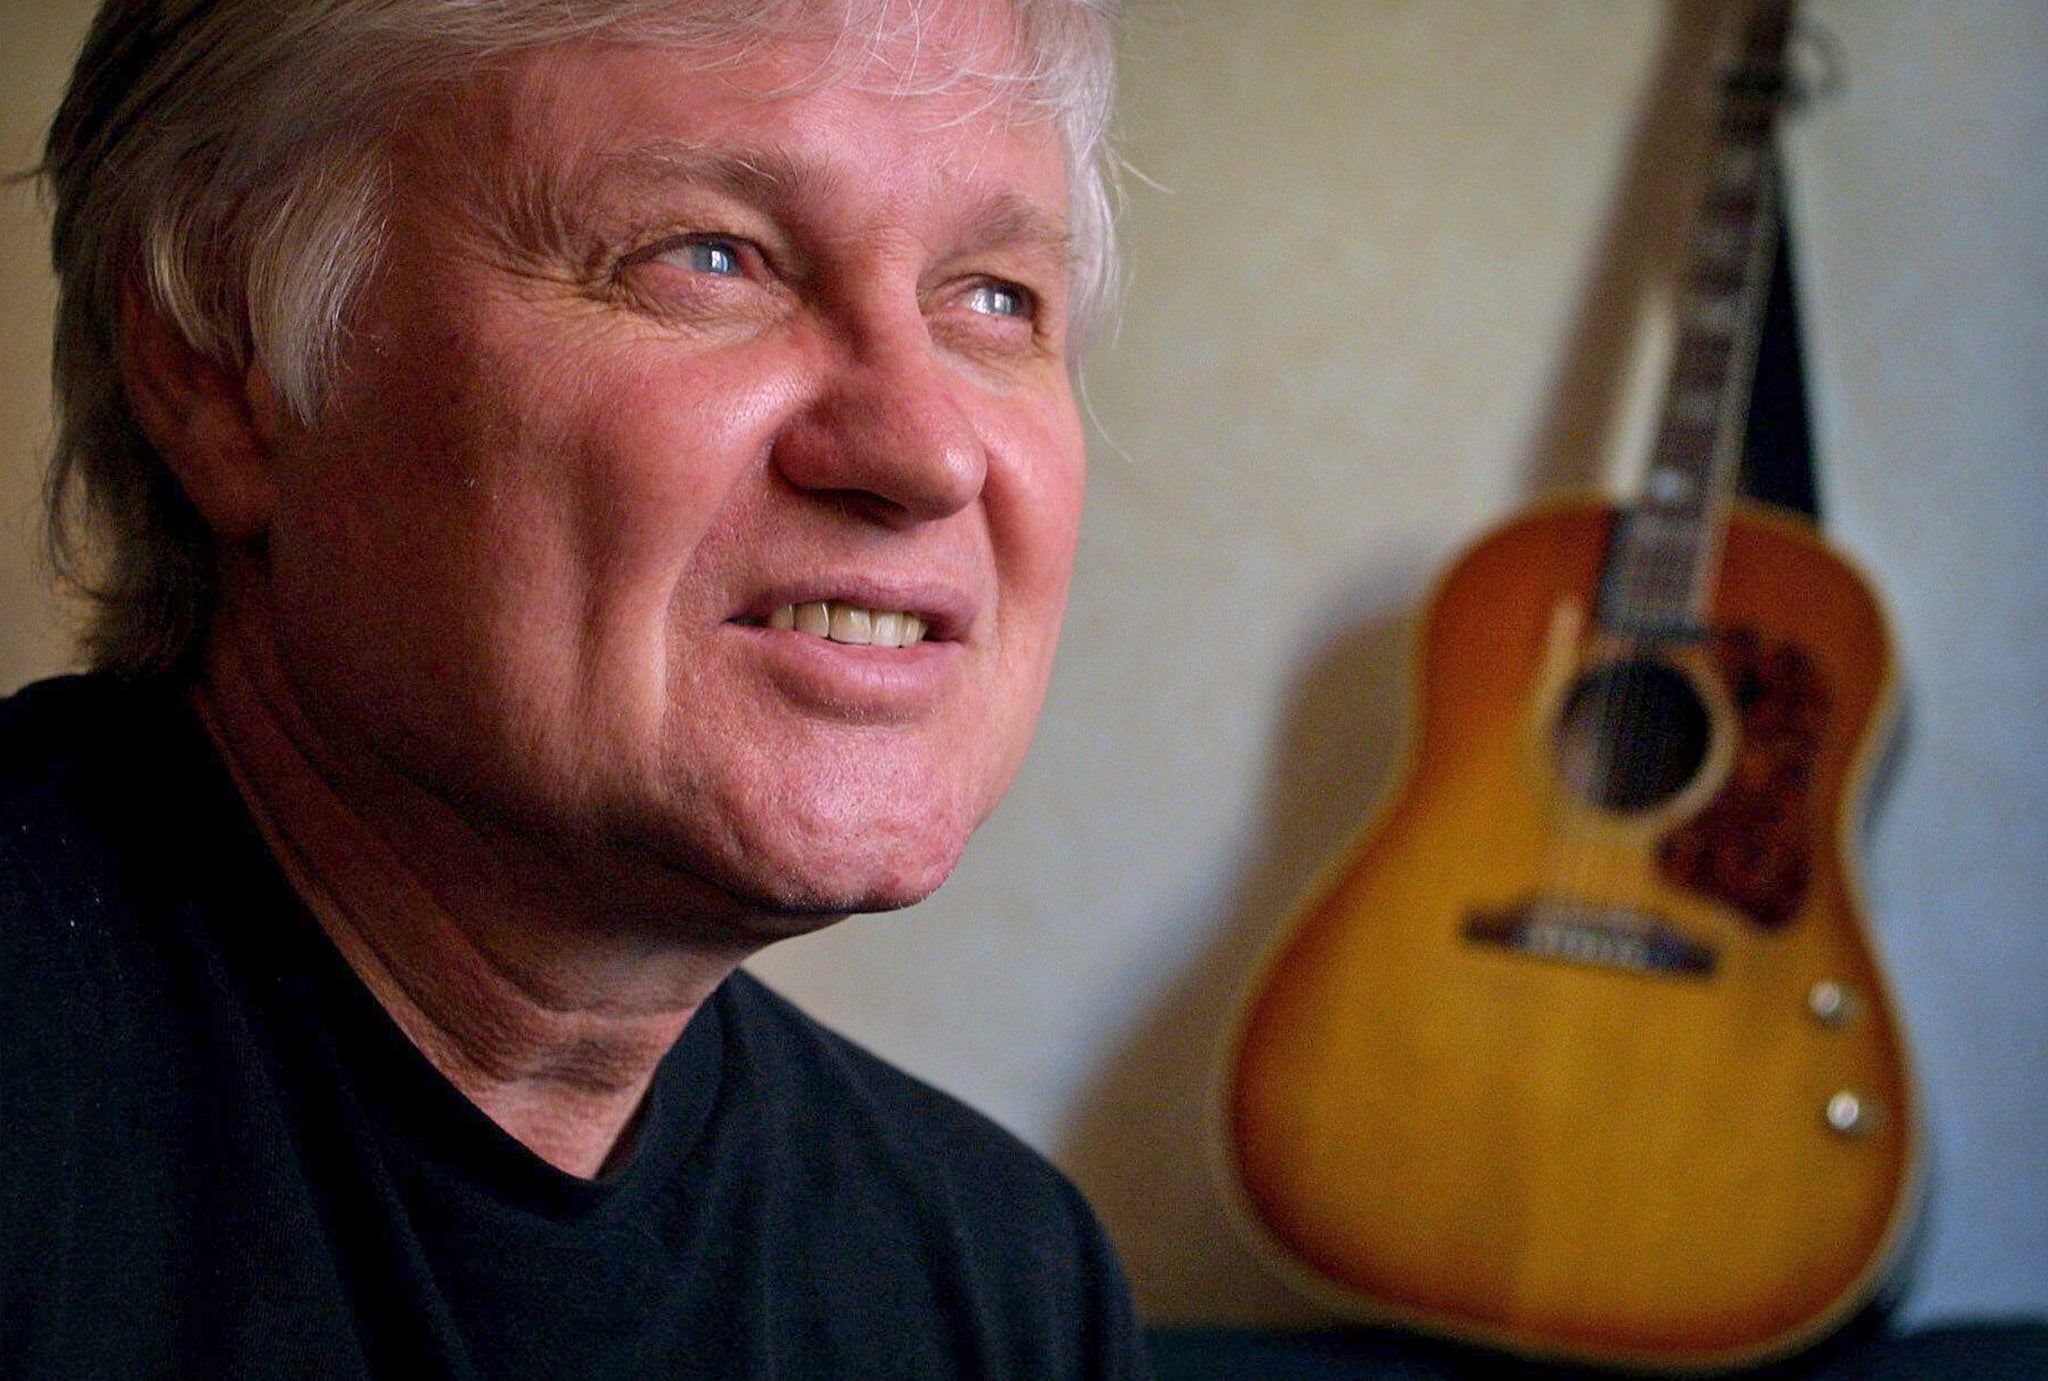 Chip Taylor releases his latest album, ‘The Cradle of All Living Things’, at age 83